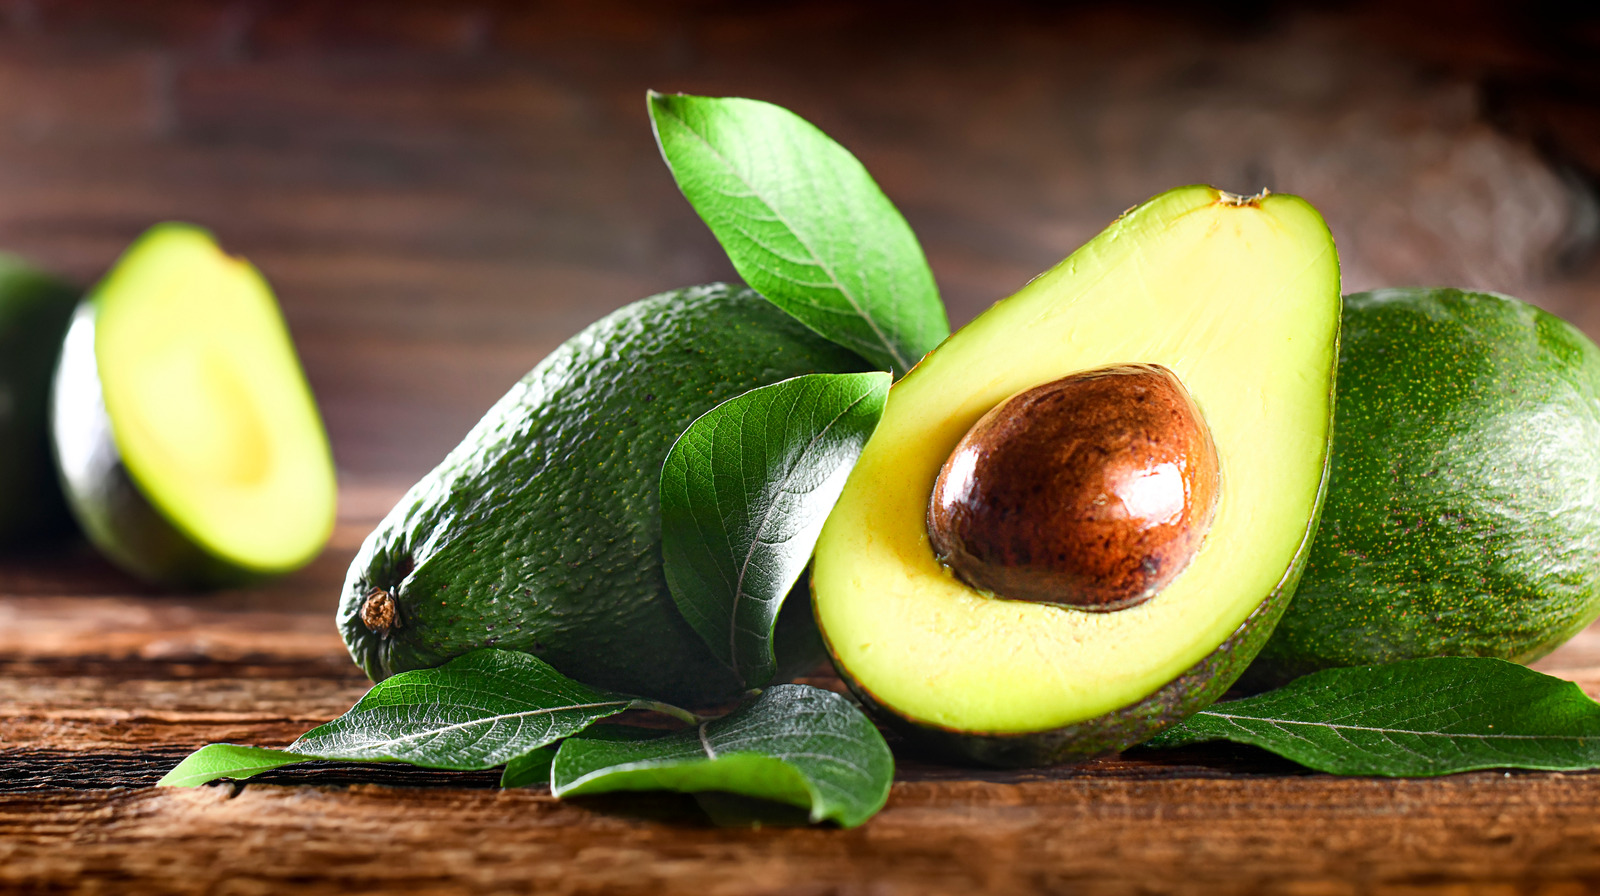 Avocado: Here's how the superfood helps in hair growth